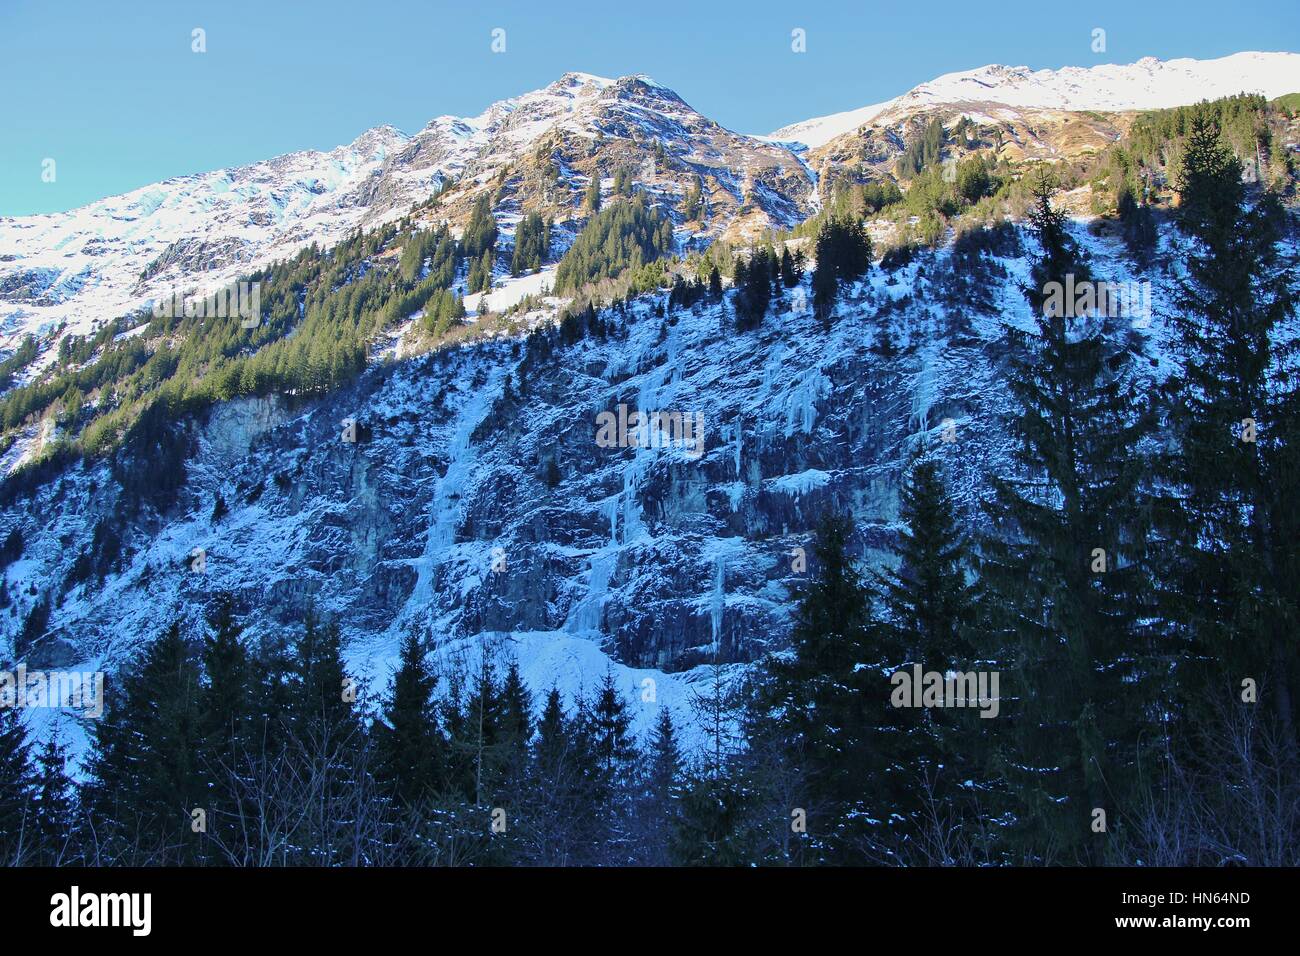 Gastein mountains in winter: Waterfalls are frozen to icicles. Near Bockstein and Bad Gastein, Austria, Europe. Approx. 1200 m above sea level. Stock Photo